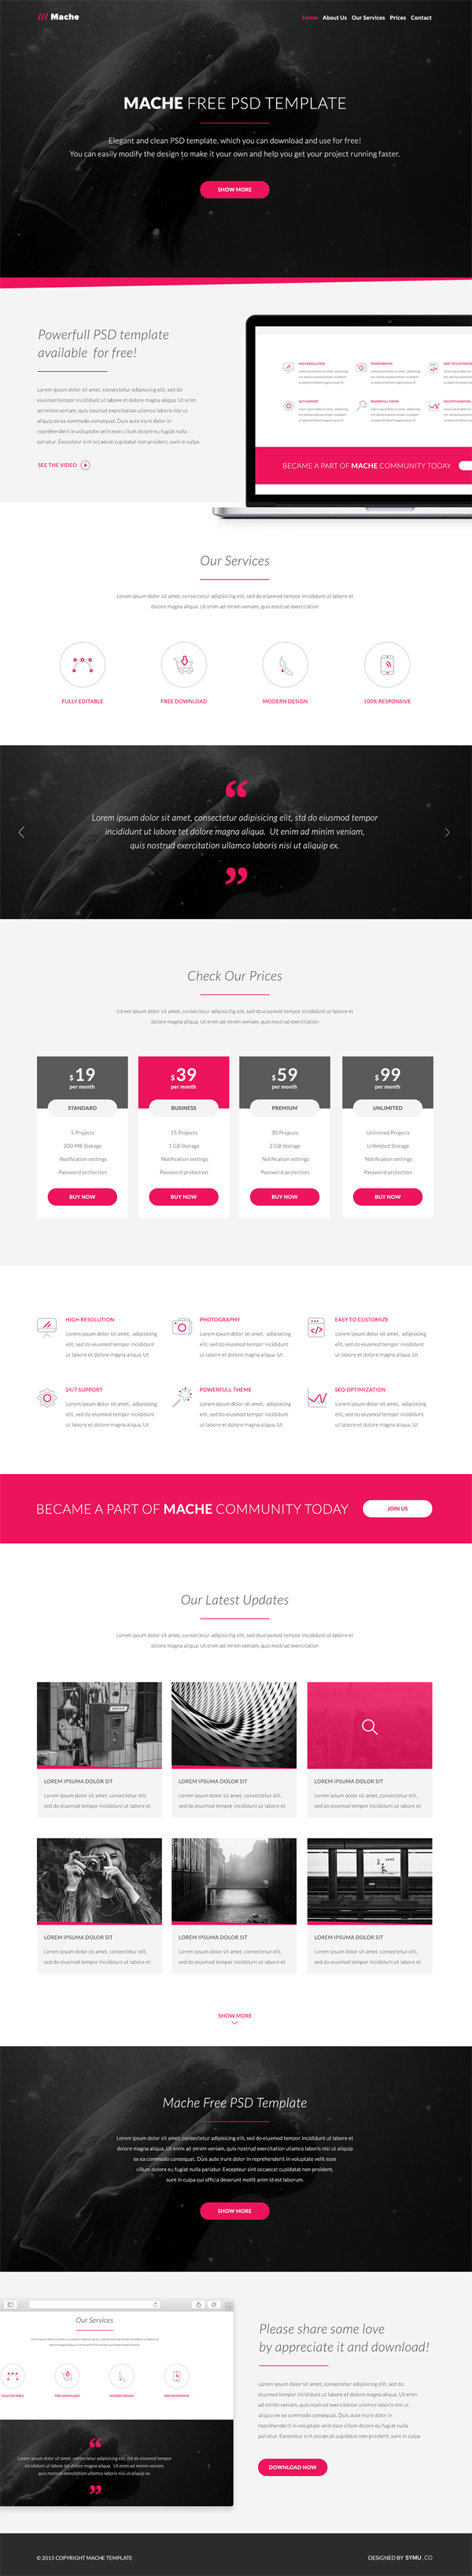 Free One Page PSD Template